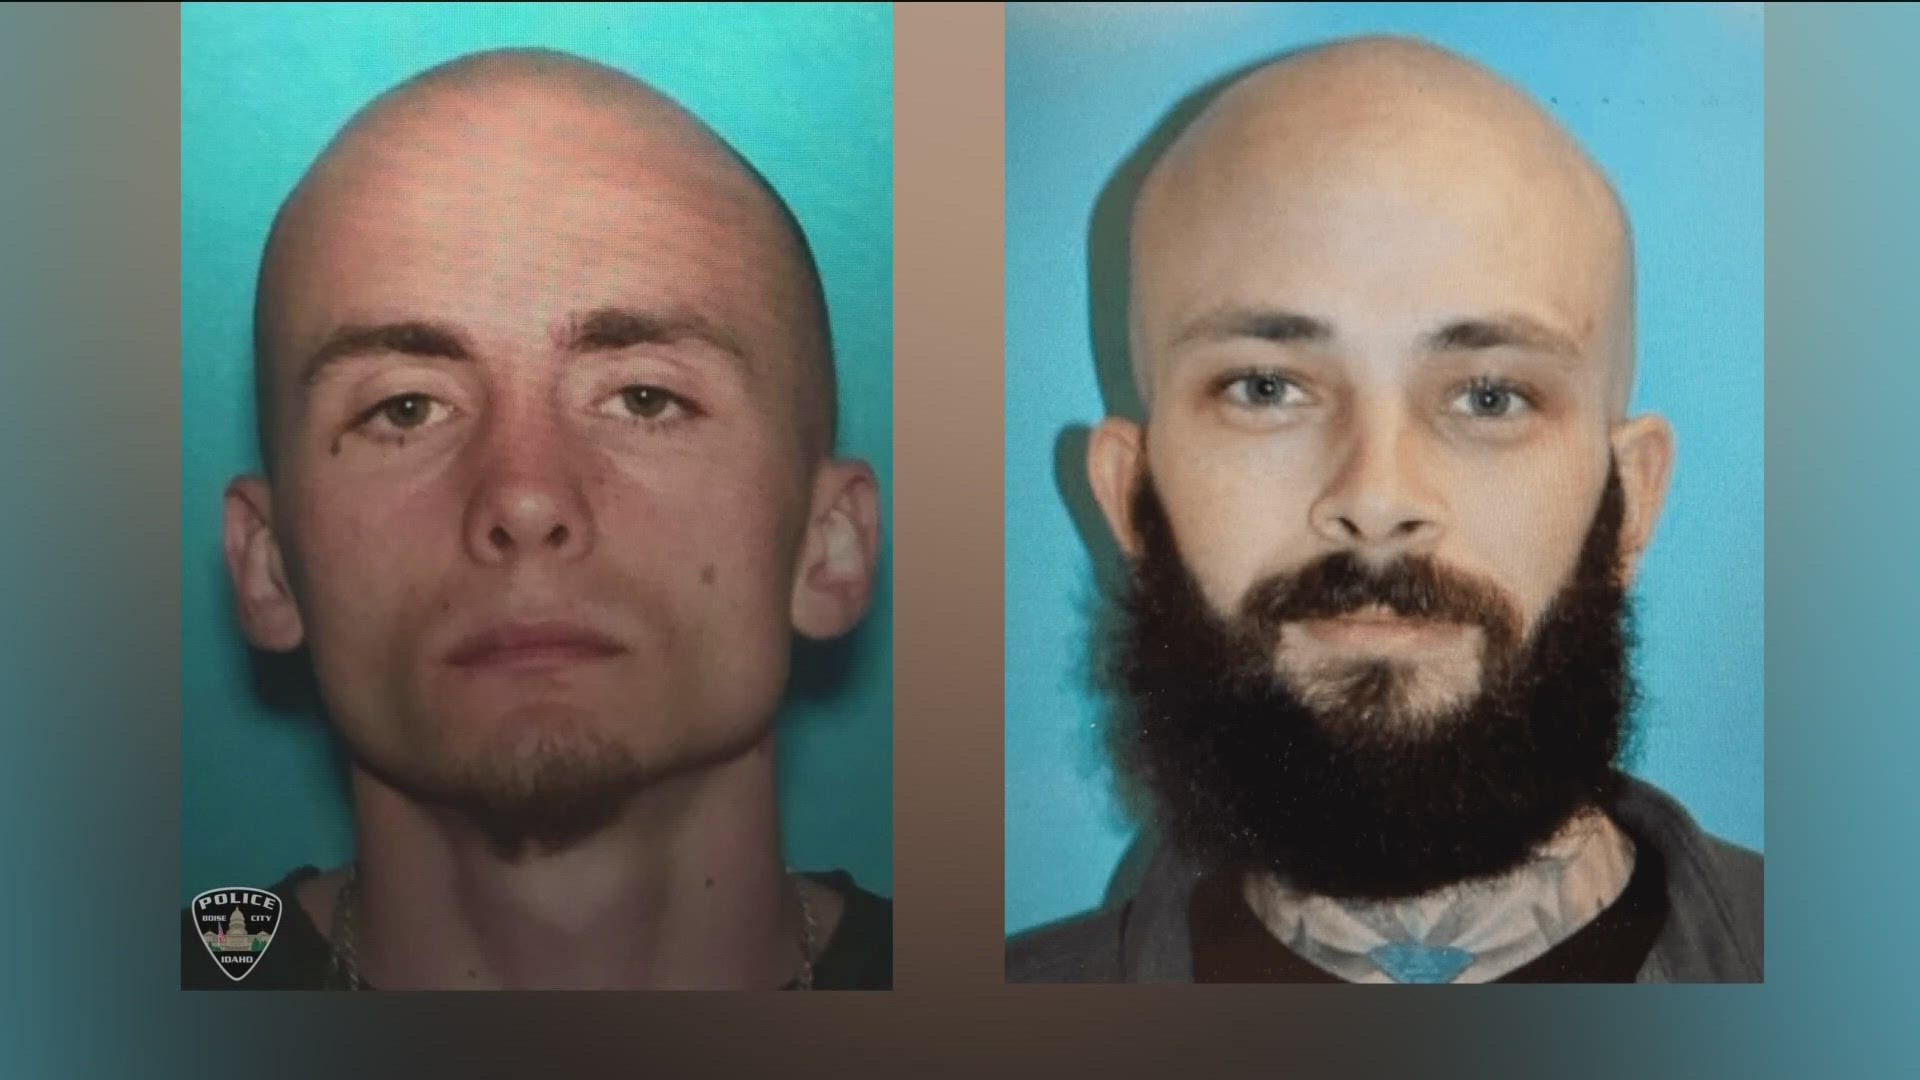 Both suspects were arrested in Twin Falls County. They were on the run for more than 24 hours.